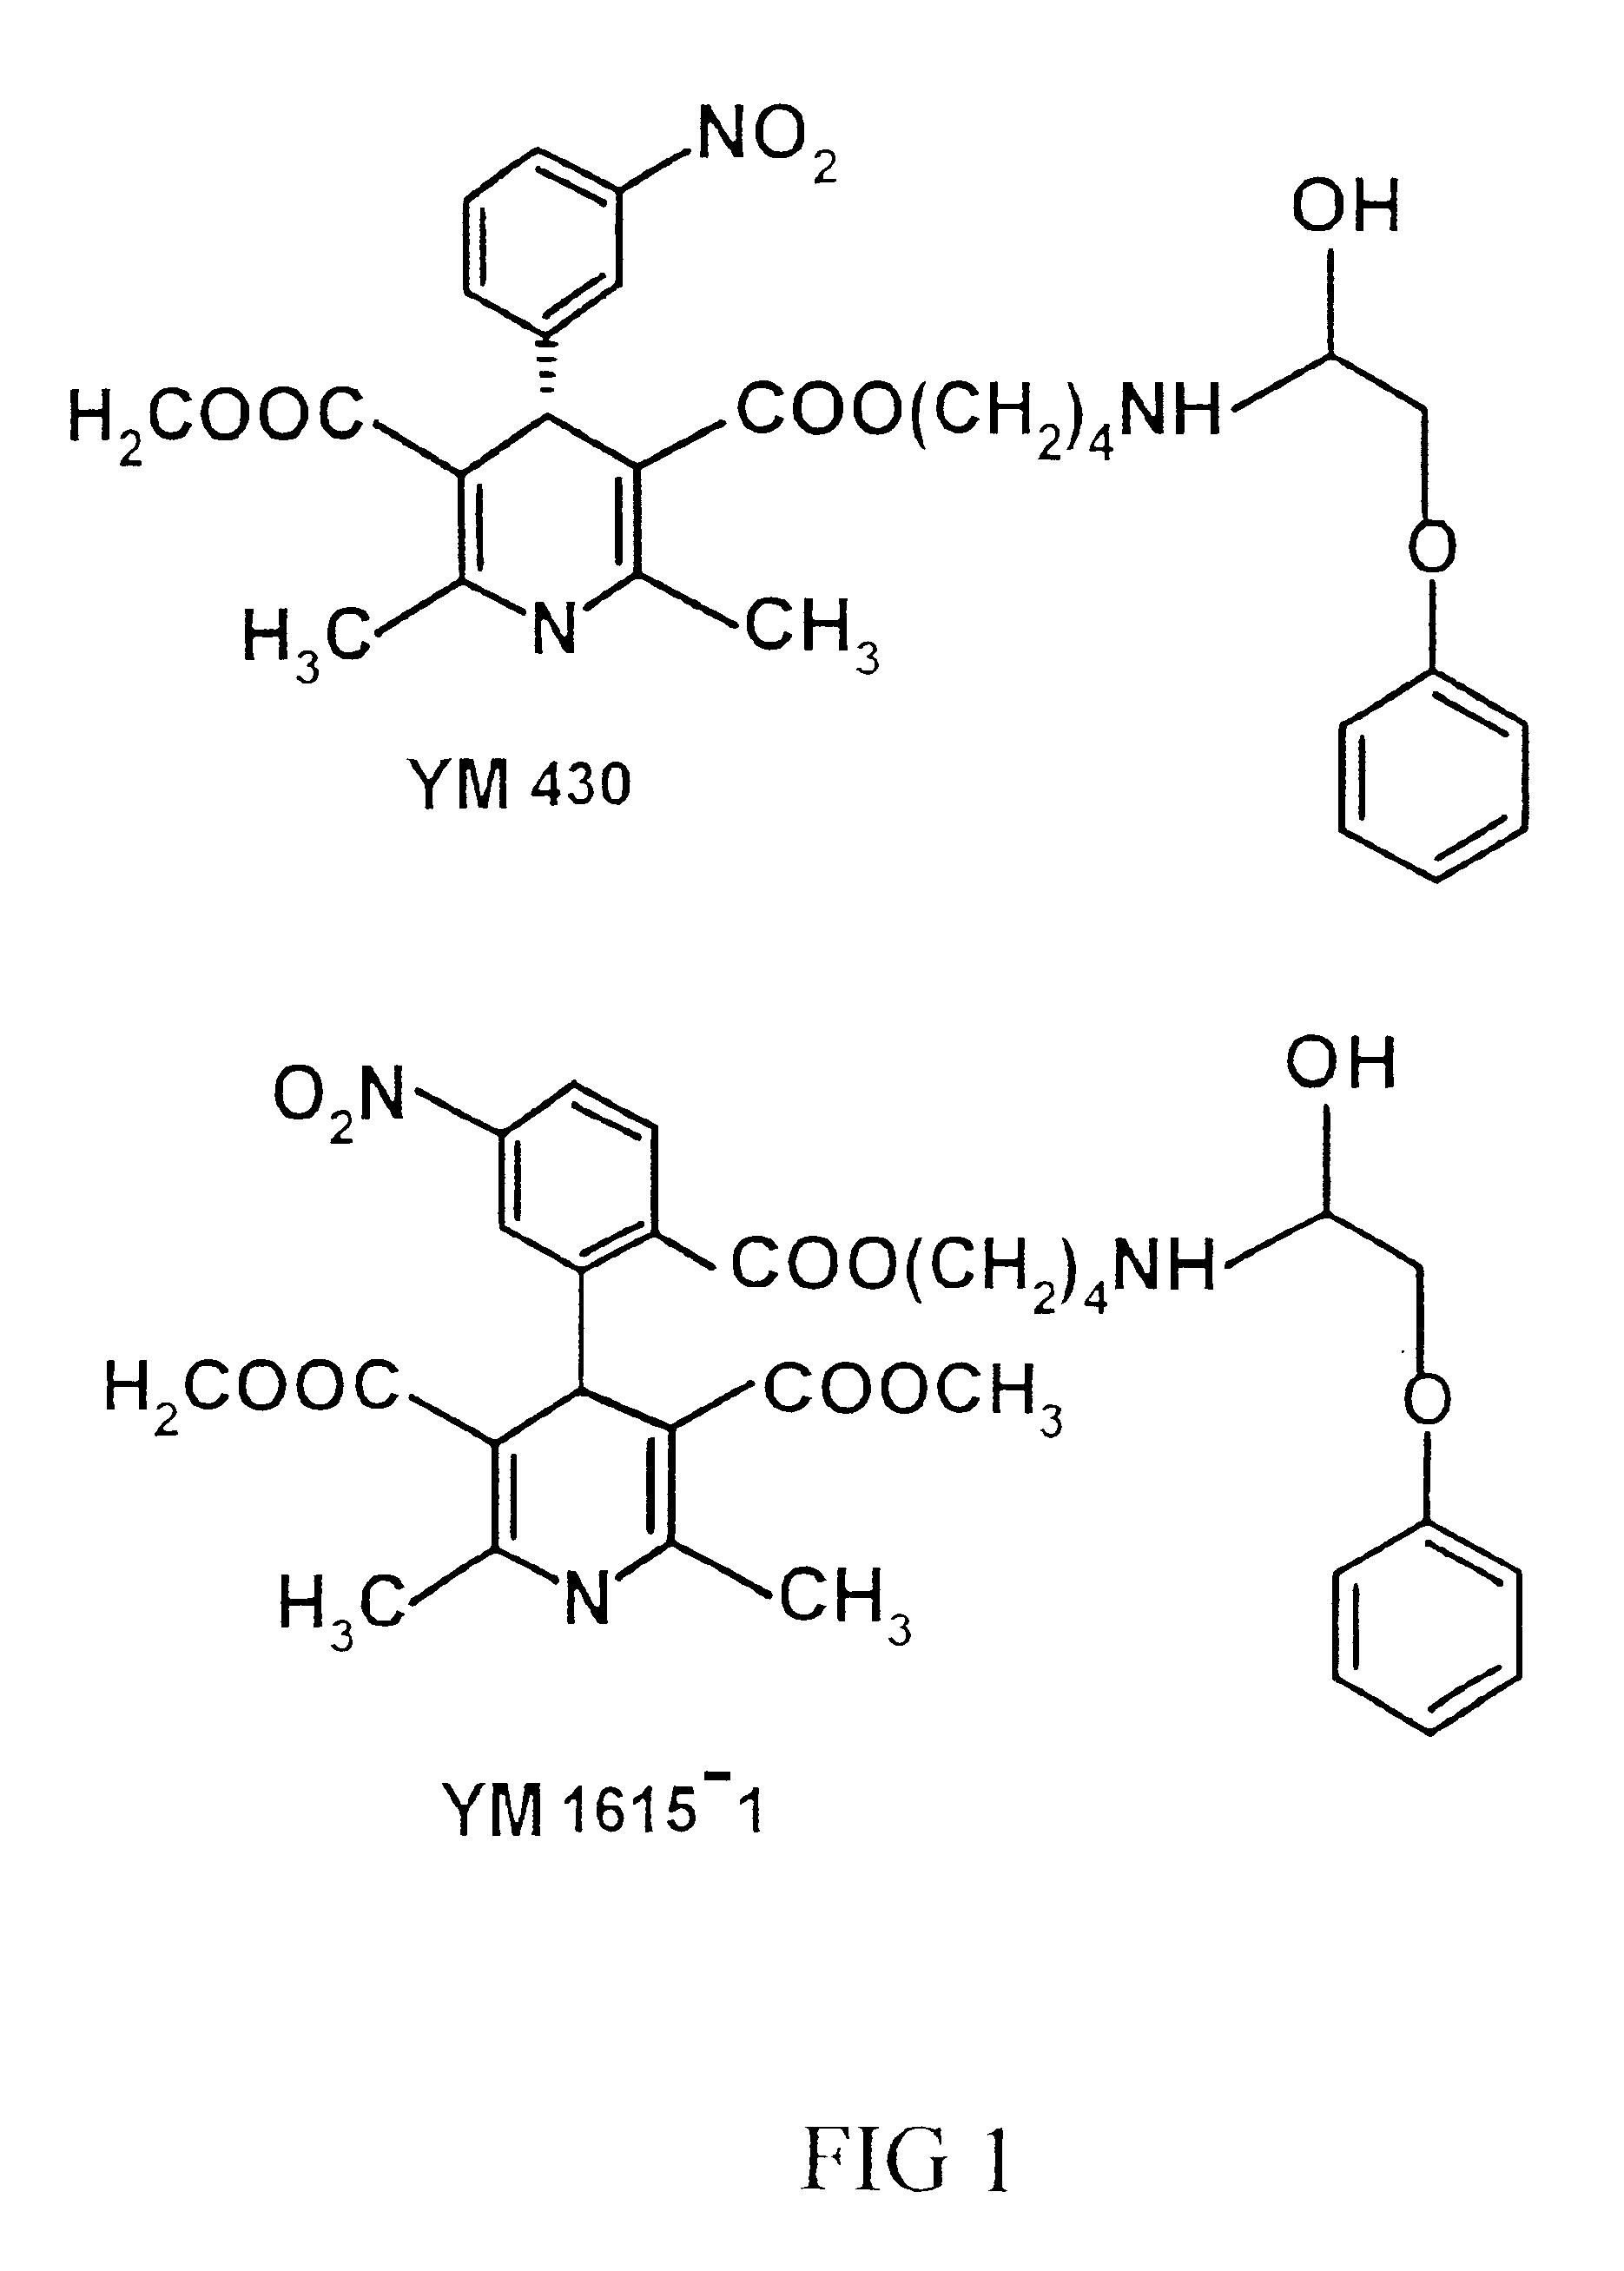 Phenoxypropanol connected with phenylpiperazine and phenoxyalkylamine terminal in its side chain